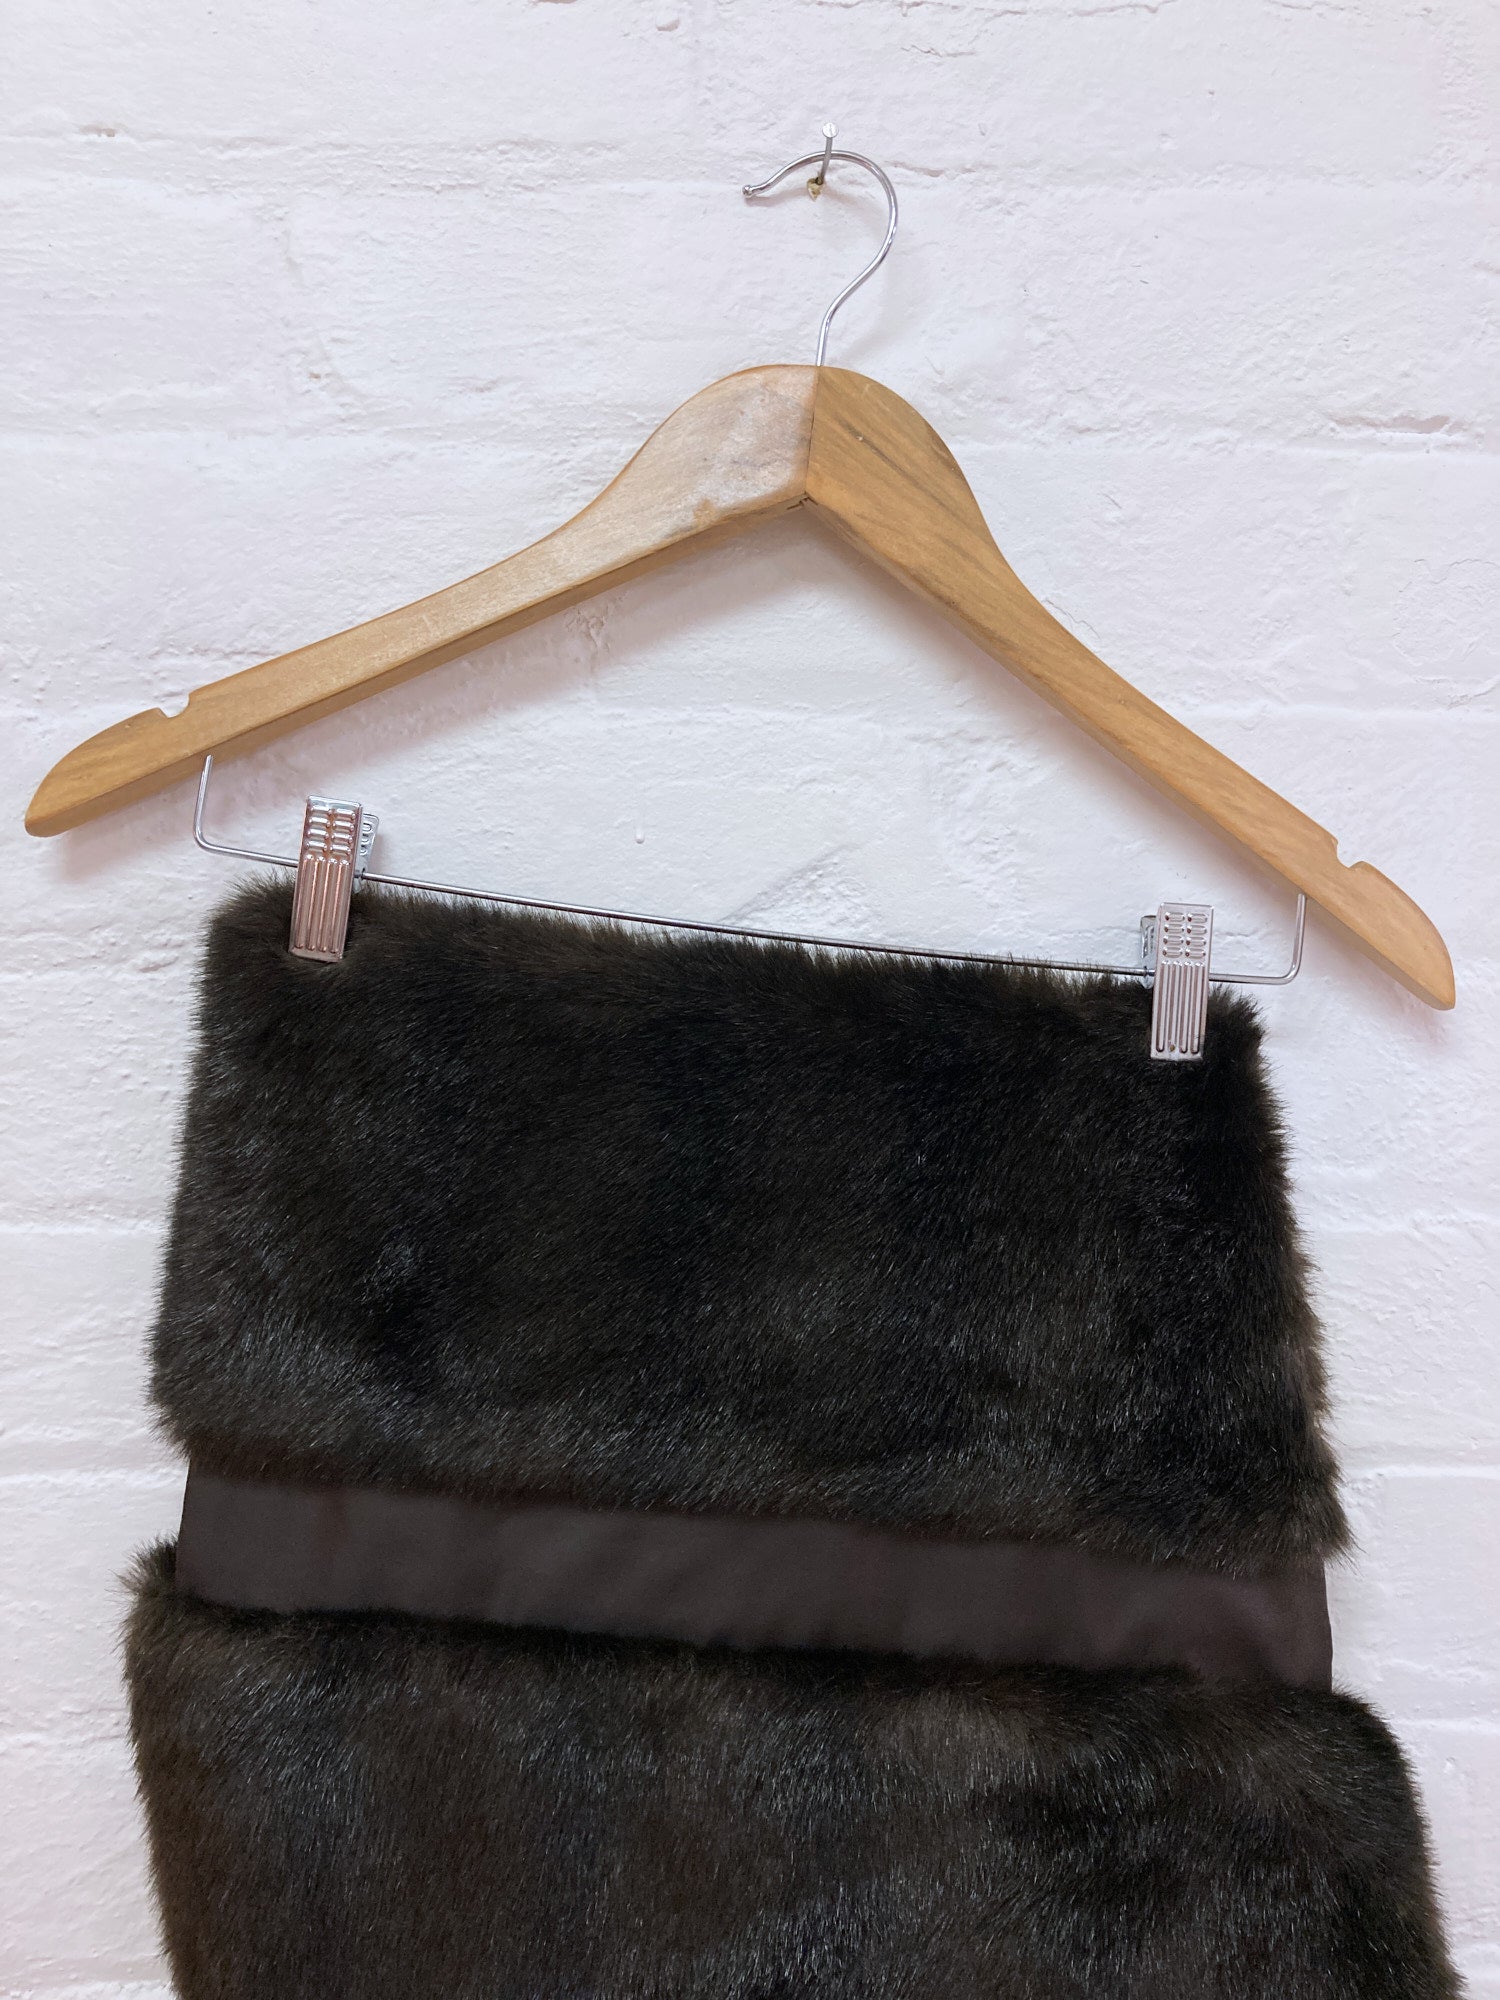 Comme des Garcons AW1997 brown acrylic faux fur snood or neck warmer